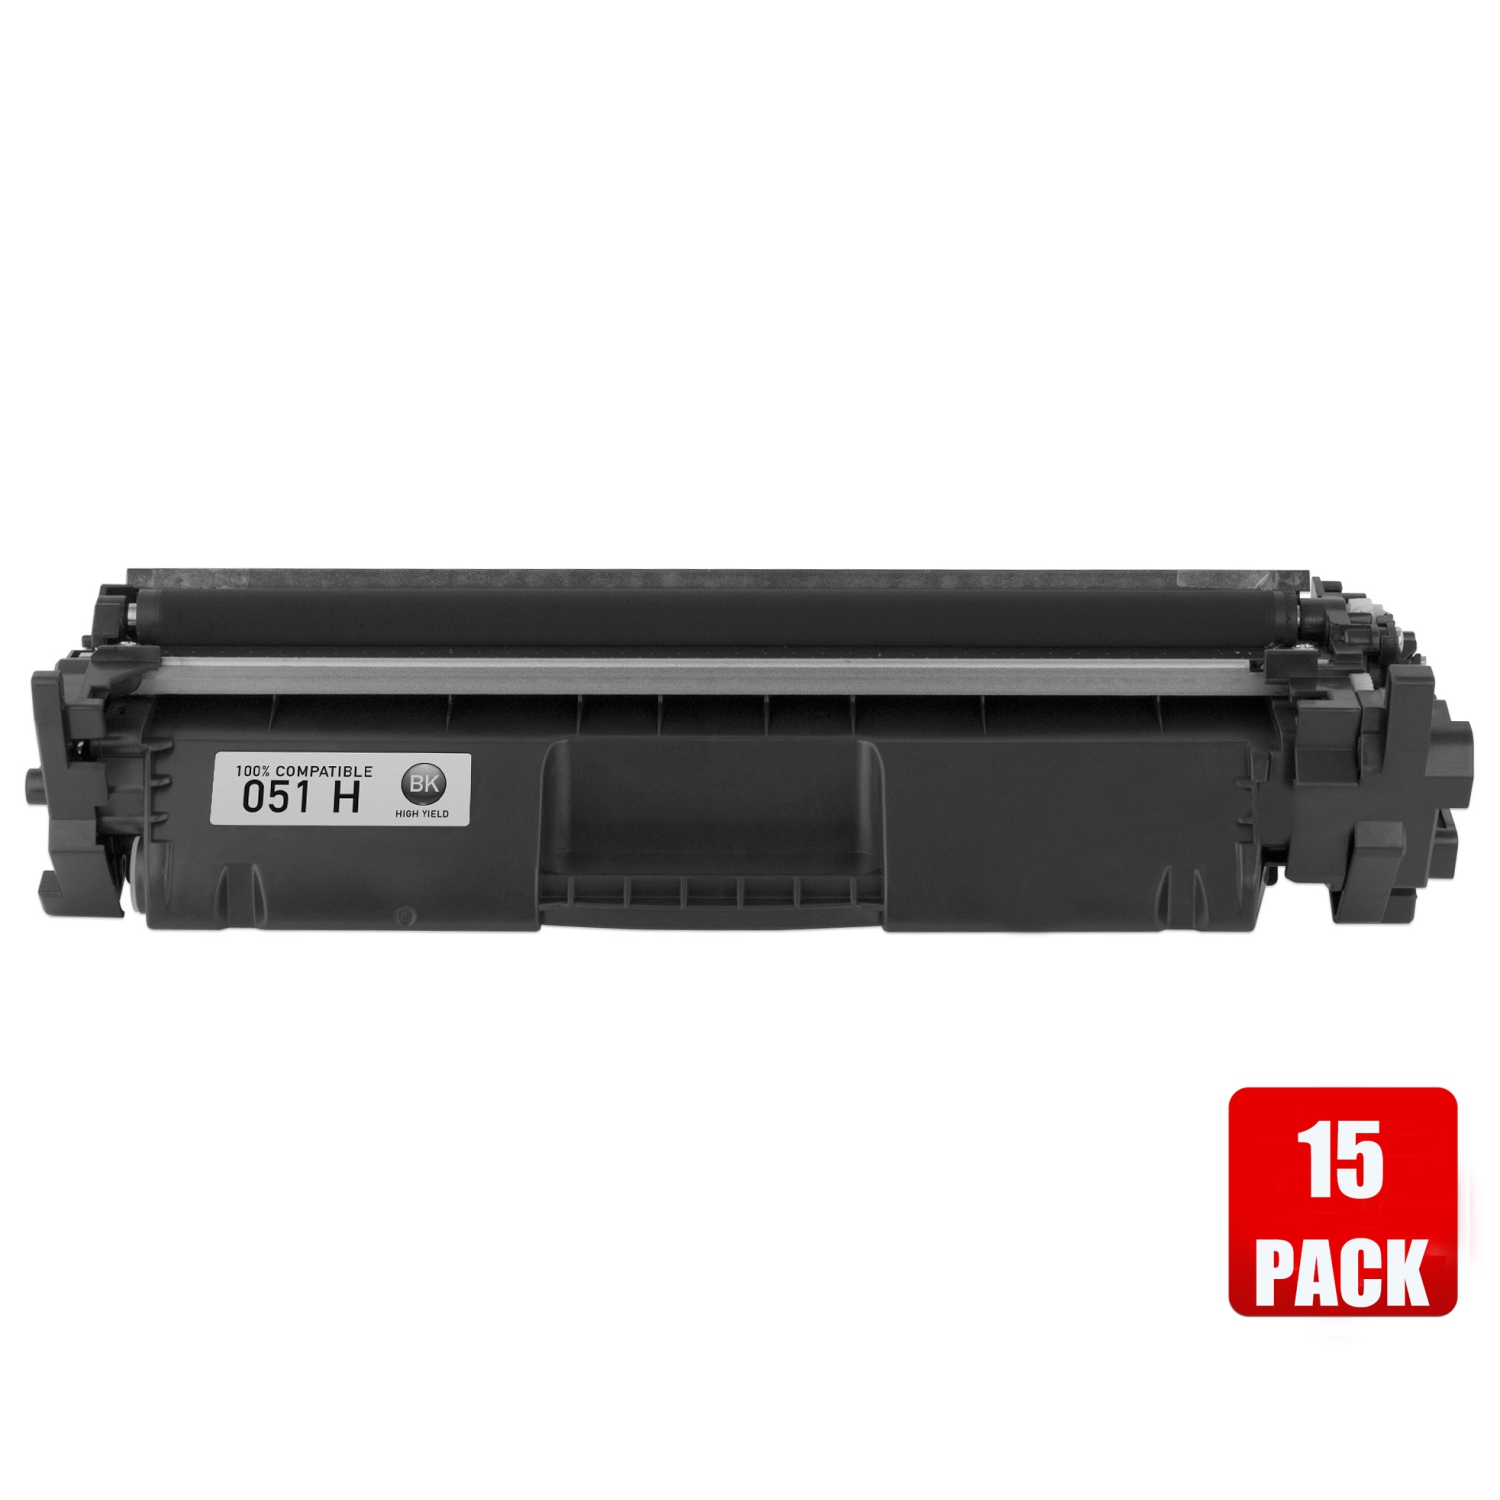 Prime 15 Pack Canon 051H/Canon-051H/051/051H High Yield Black Compatible Toner Cartridge # FREE SHIPPING